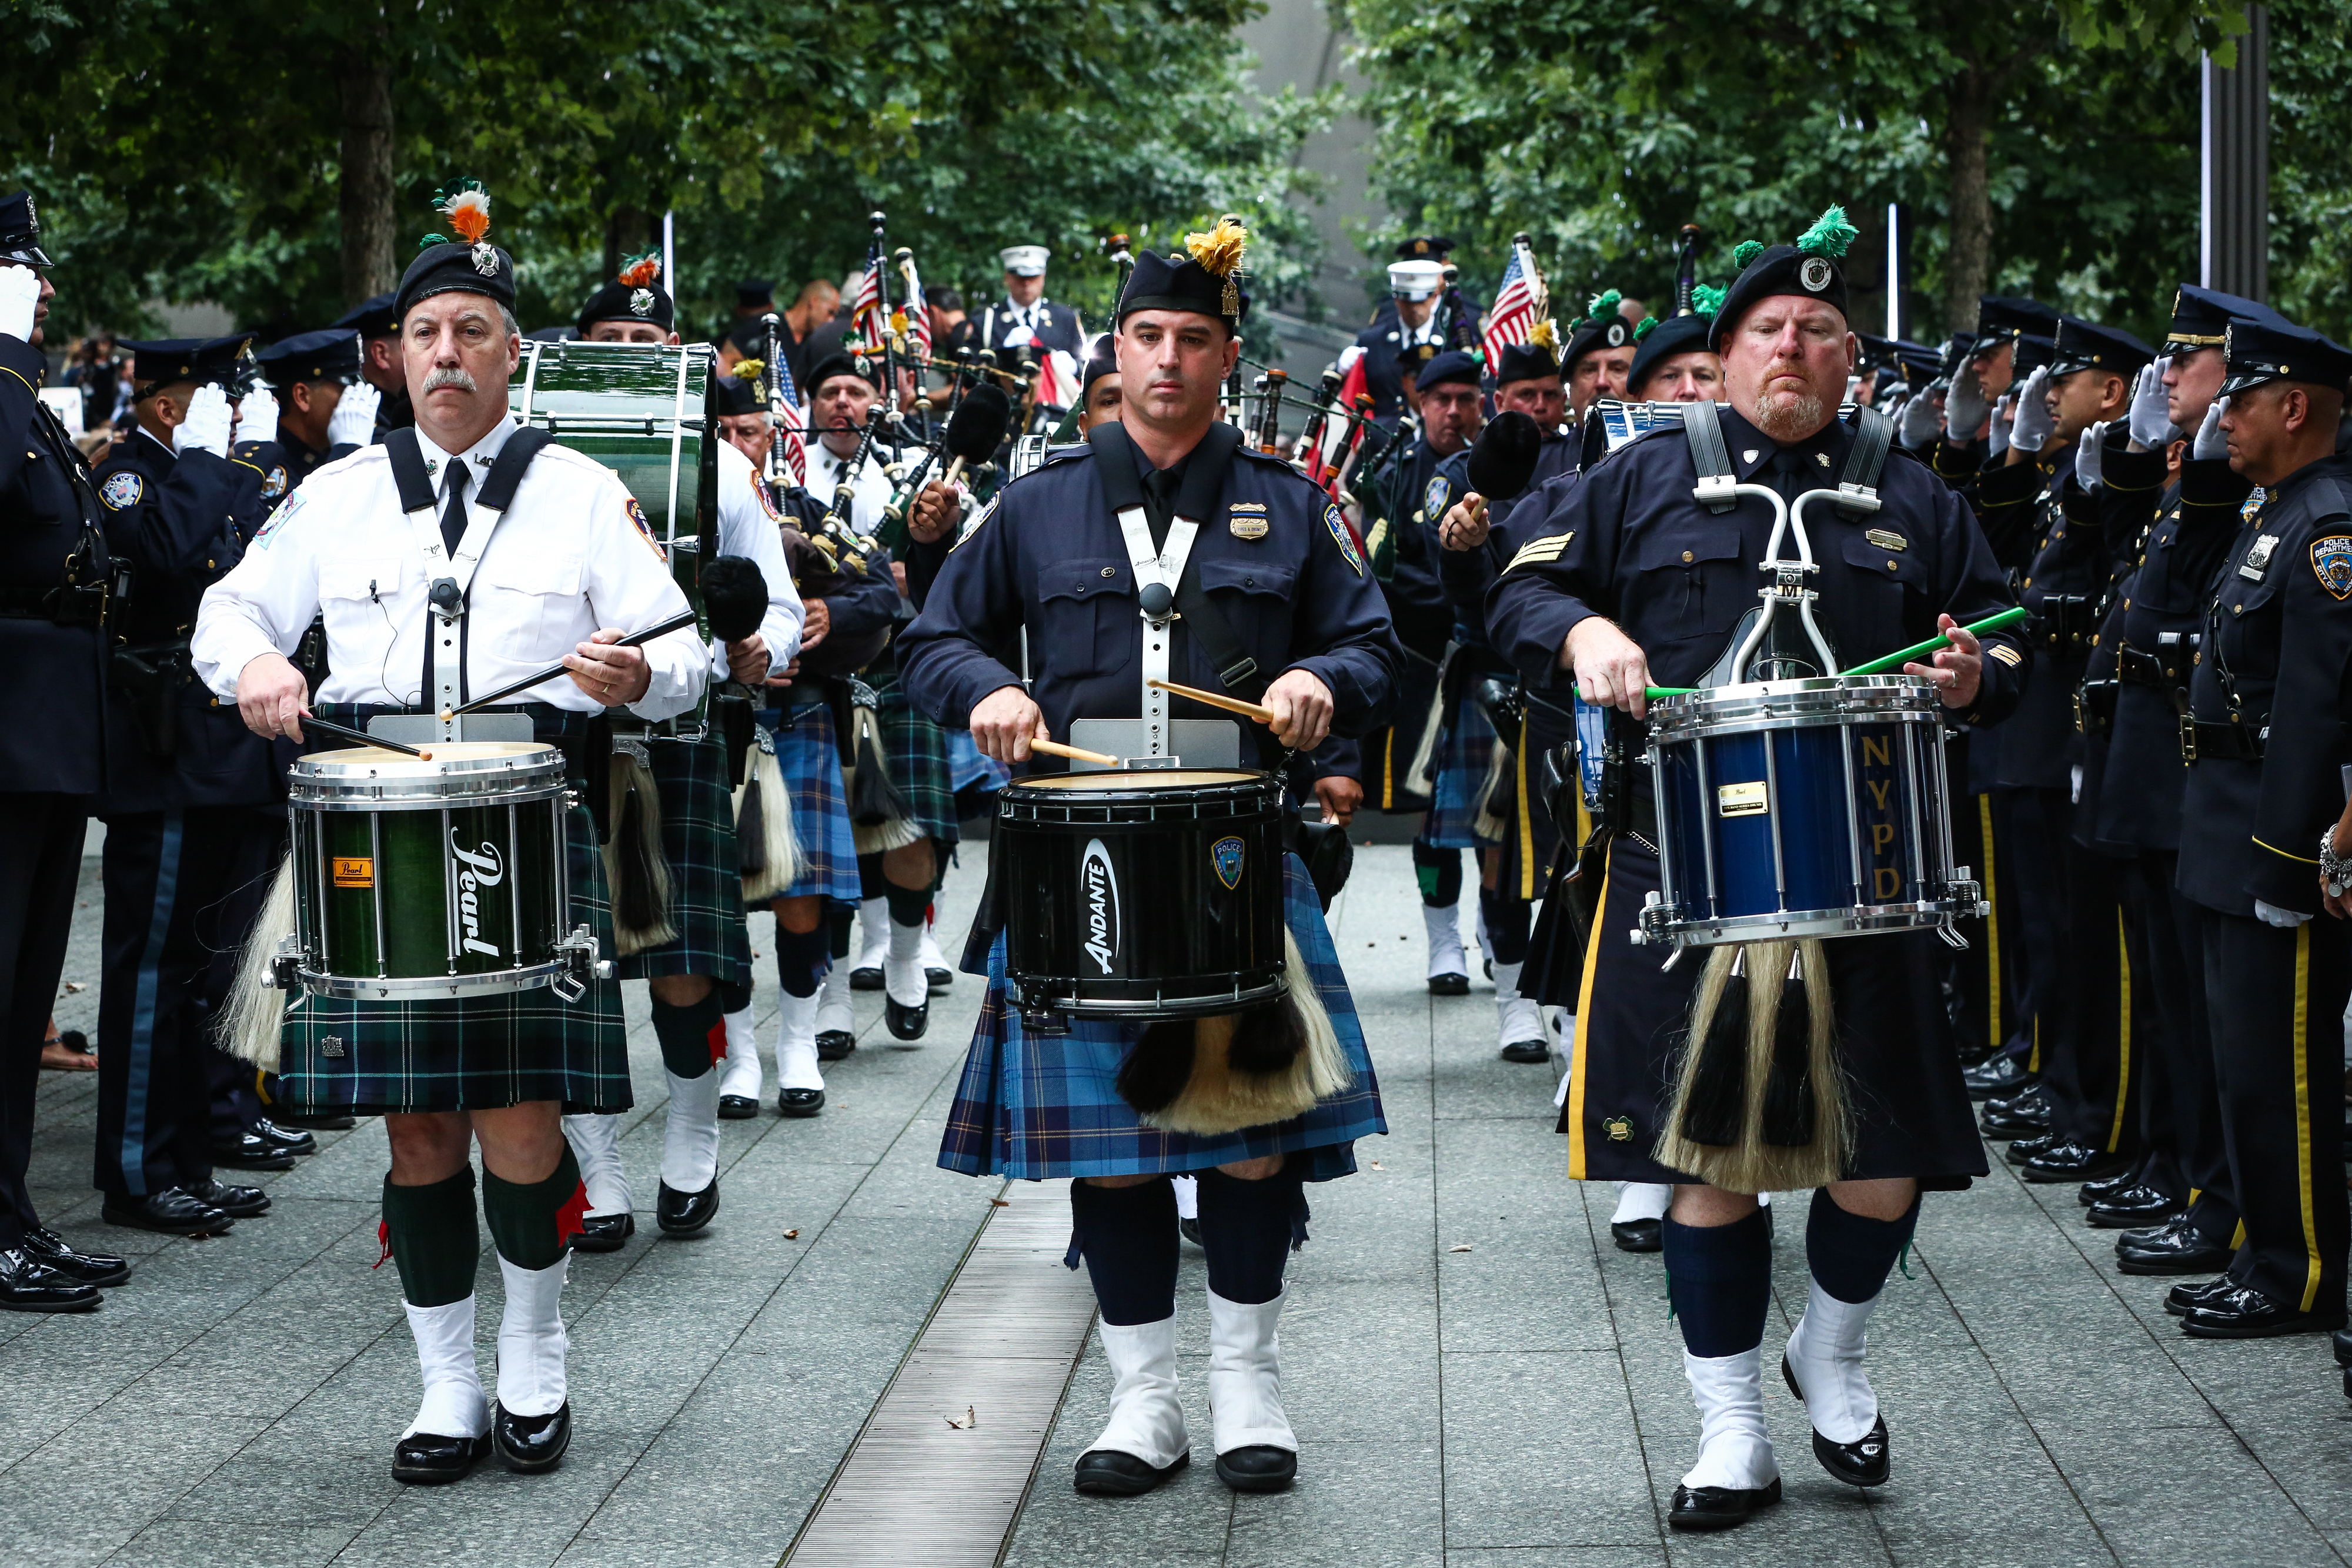 Members of the FDNY, NYPD, and PAPD pipes and drums bands play on Memorial plaza. Three band members in the foreground are wearing kilts and playing snare drums. The band members are lined by uniformed officers who are saluting as the band marches by.